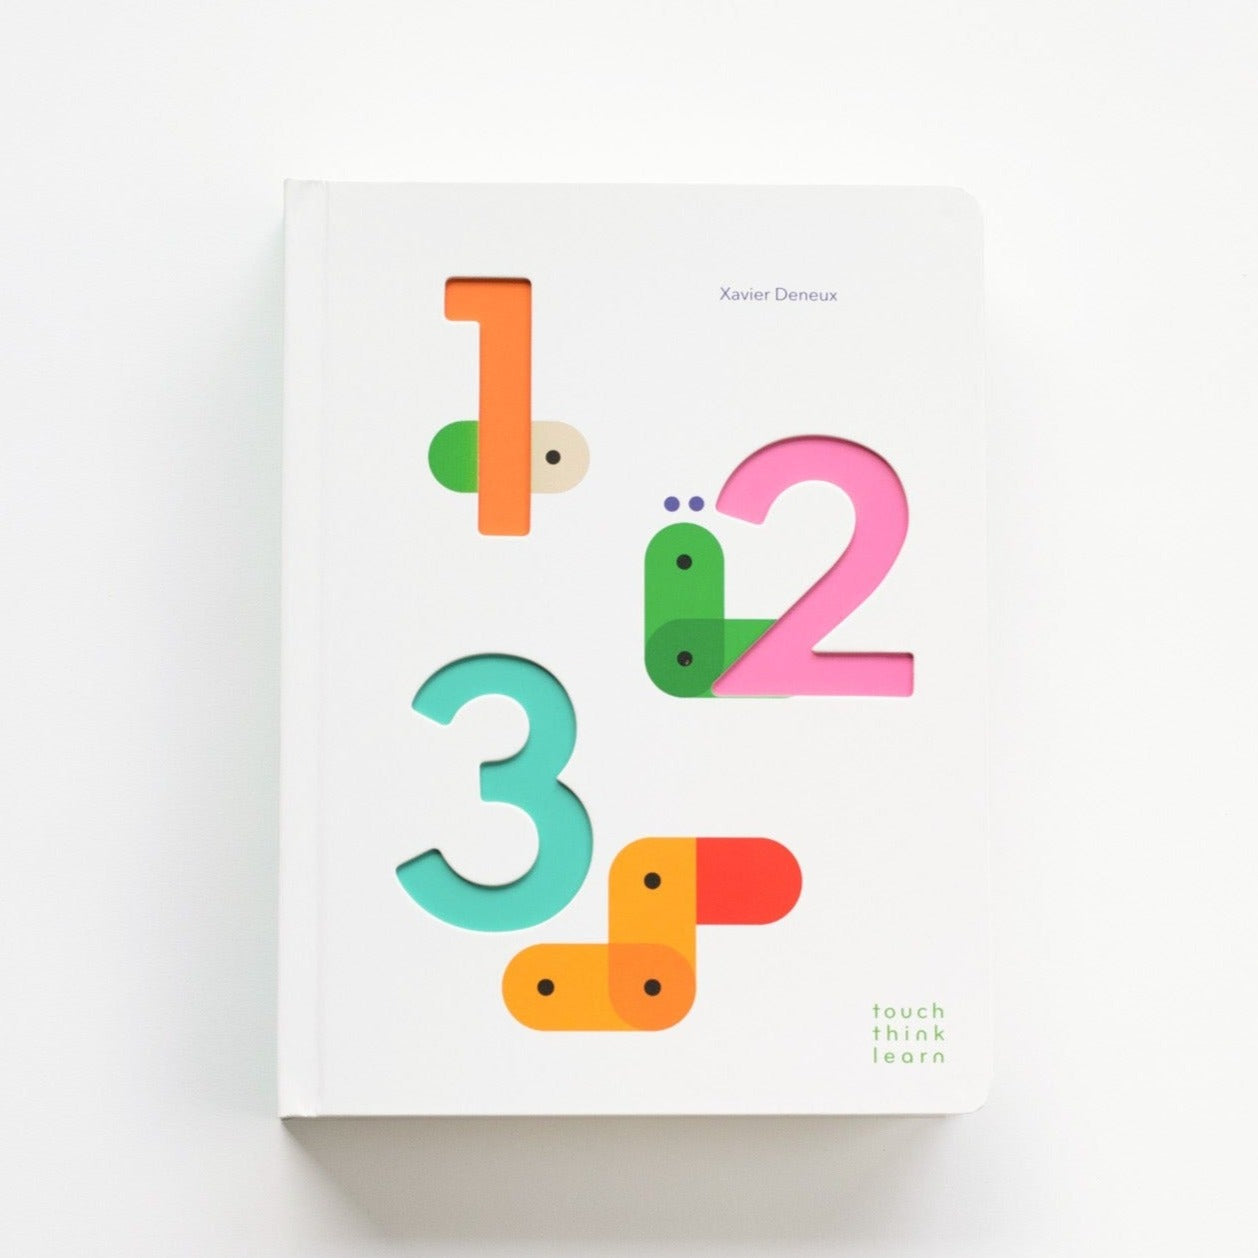 A white board book with cutouts in the shapes of numbers 1, 2 and 3 with colored paper on first page showing through. Text on book reads, "Xavier Deneux touch think learn". Photographed on white background.